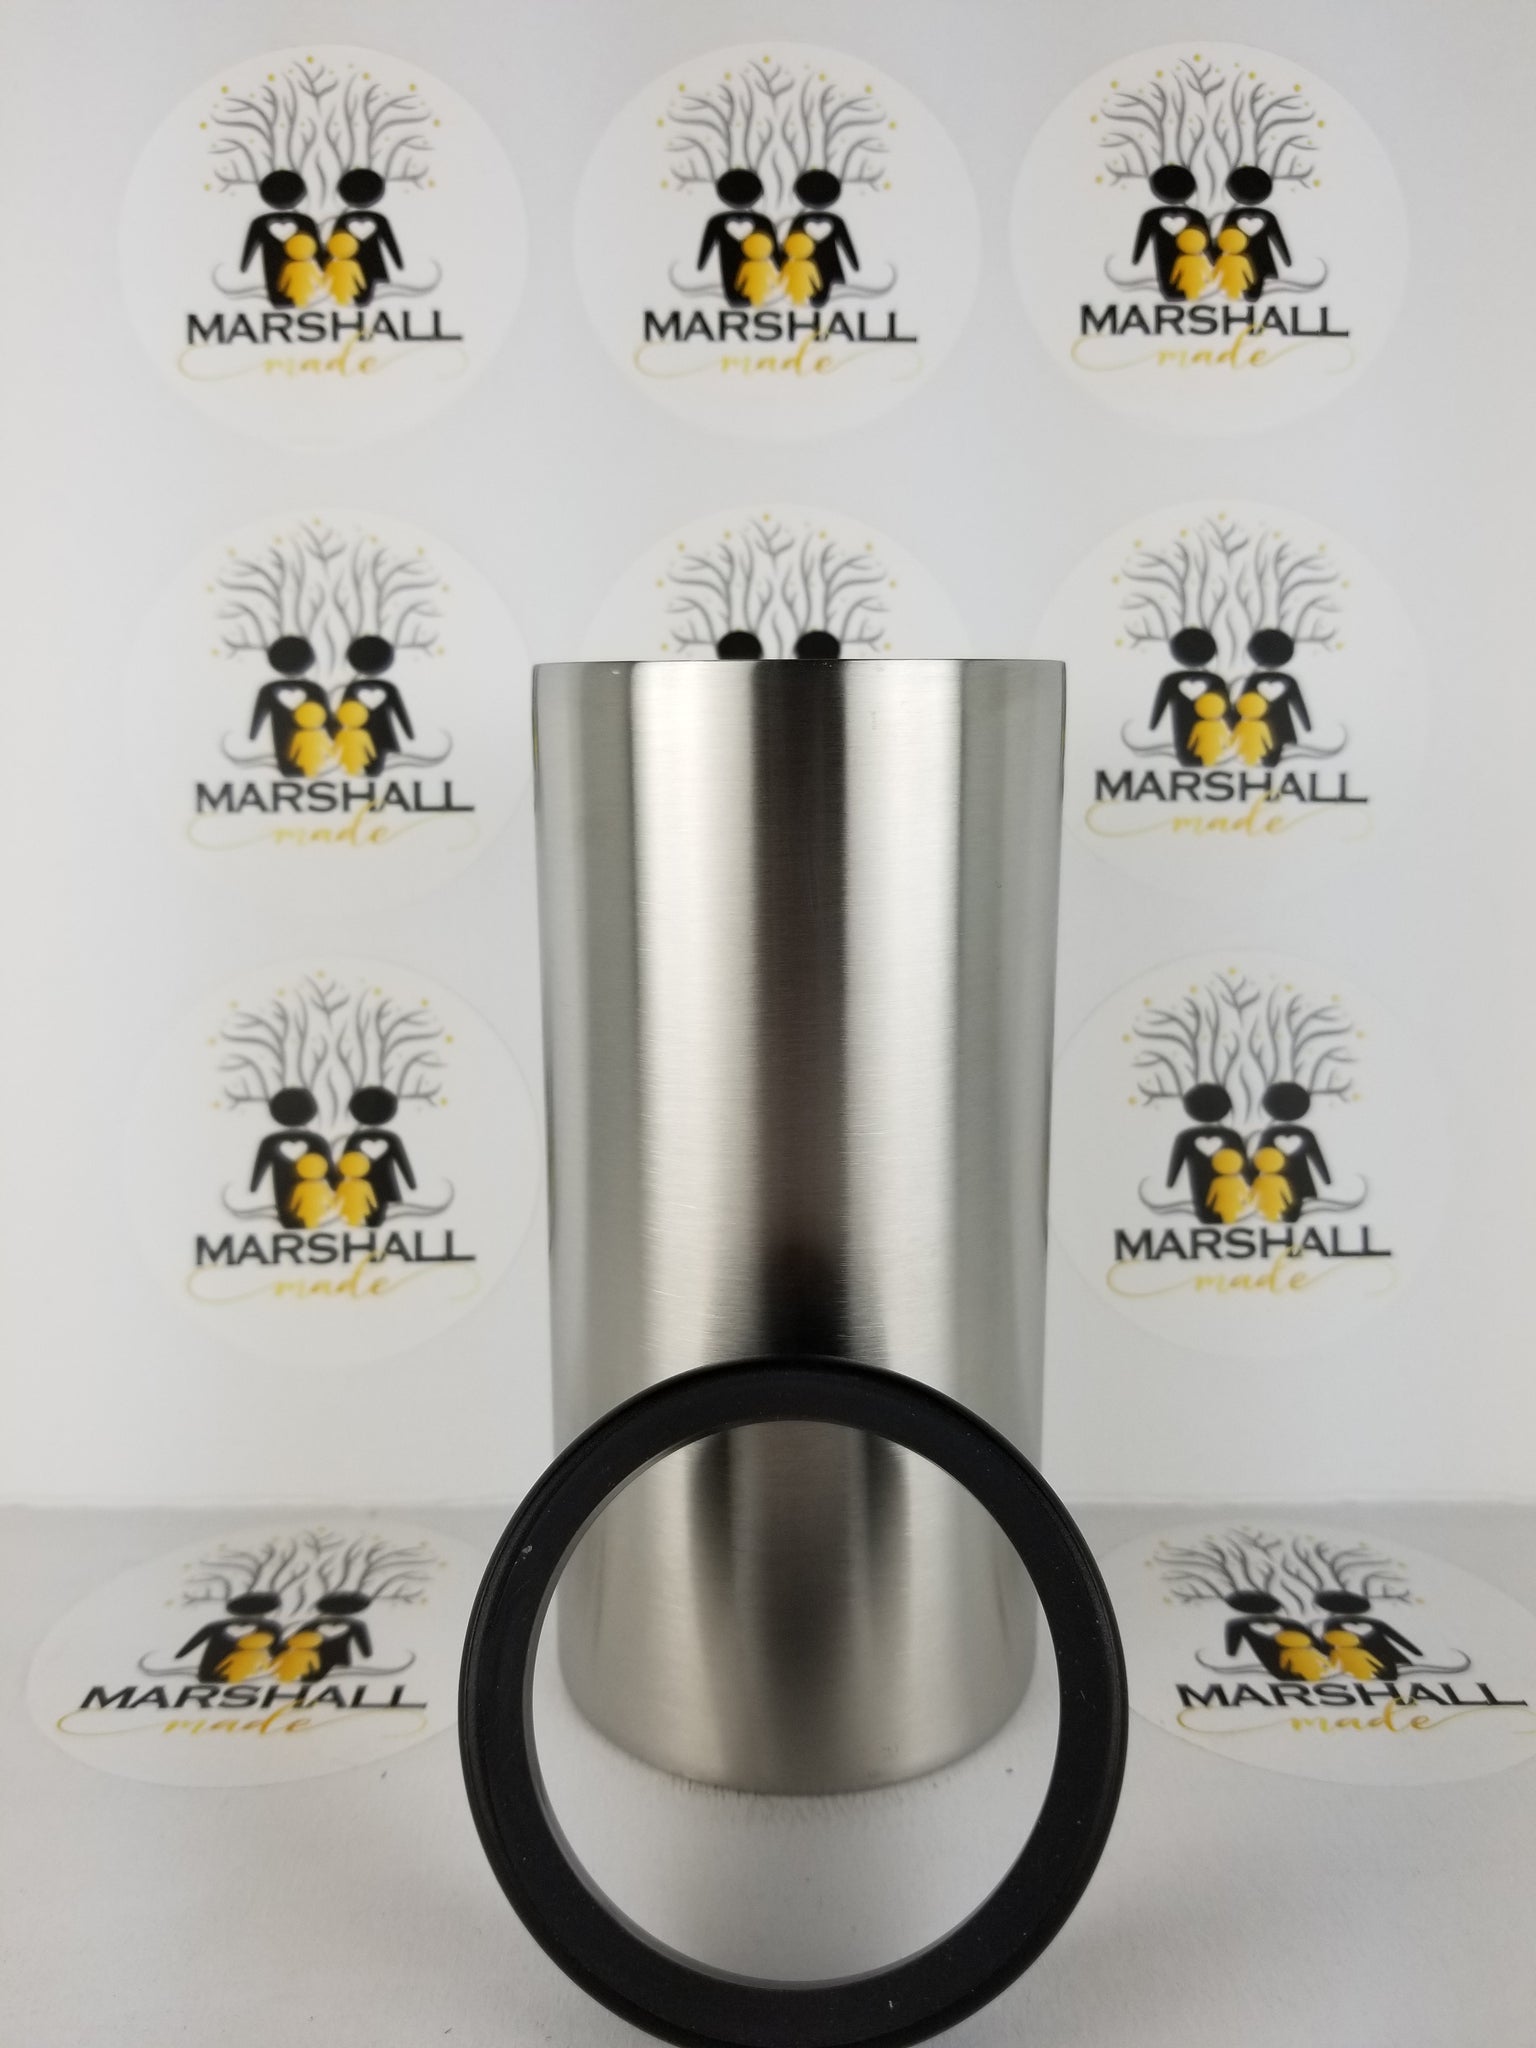 Rae Dunn Slim Can Coolers. Stainless Steel Slim Can Koozies for